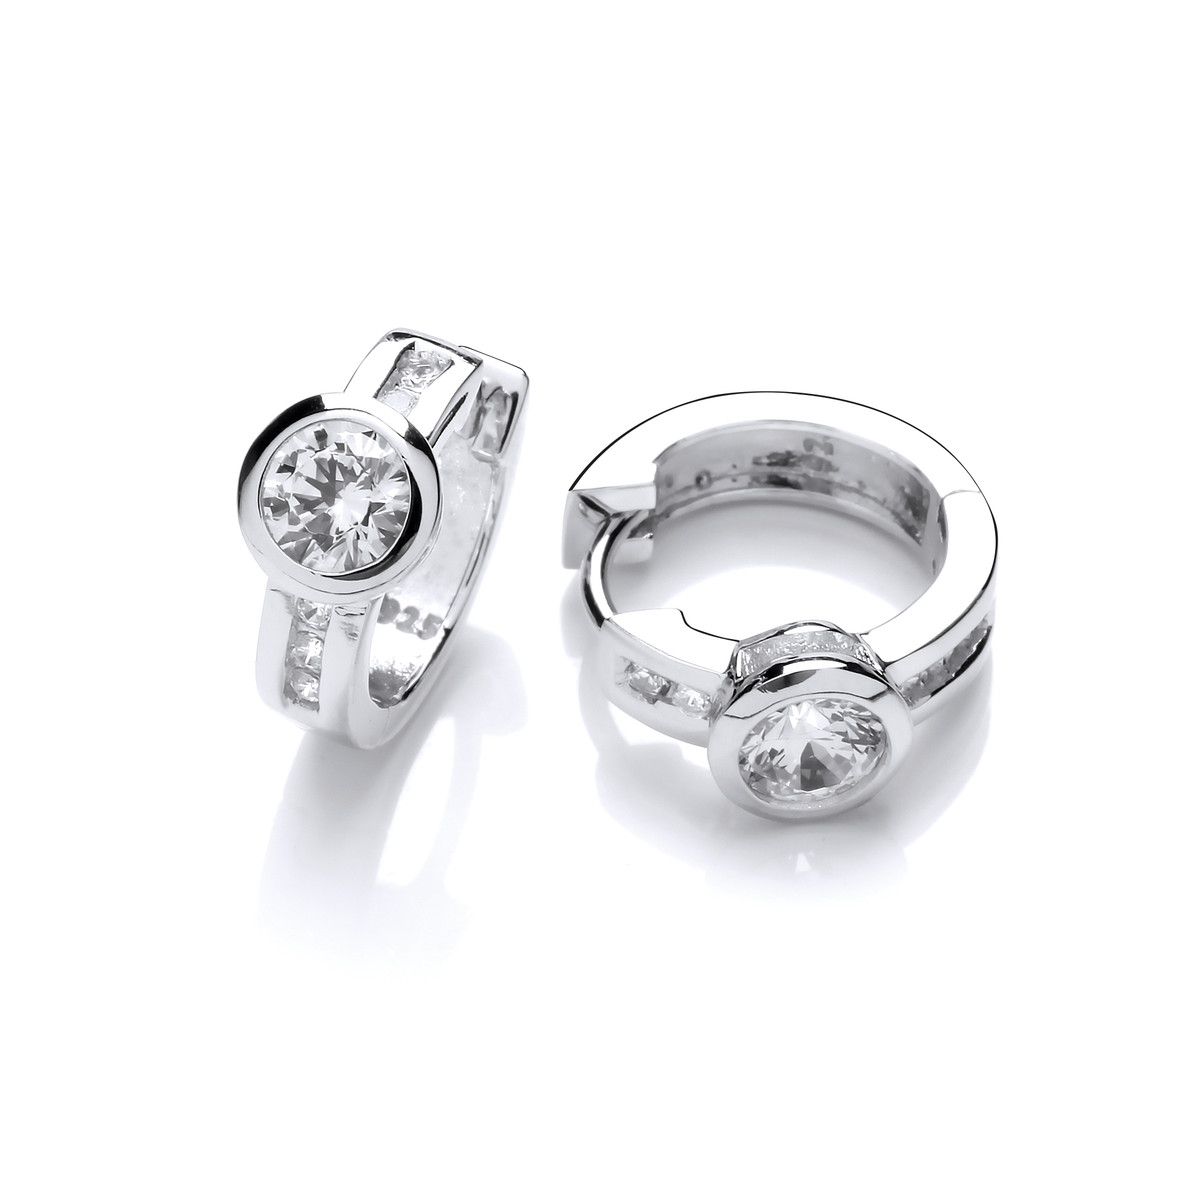 Silver & Cubic Zirconia Huggie Earrings - Cavendish French